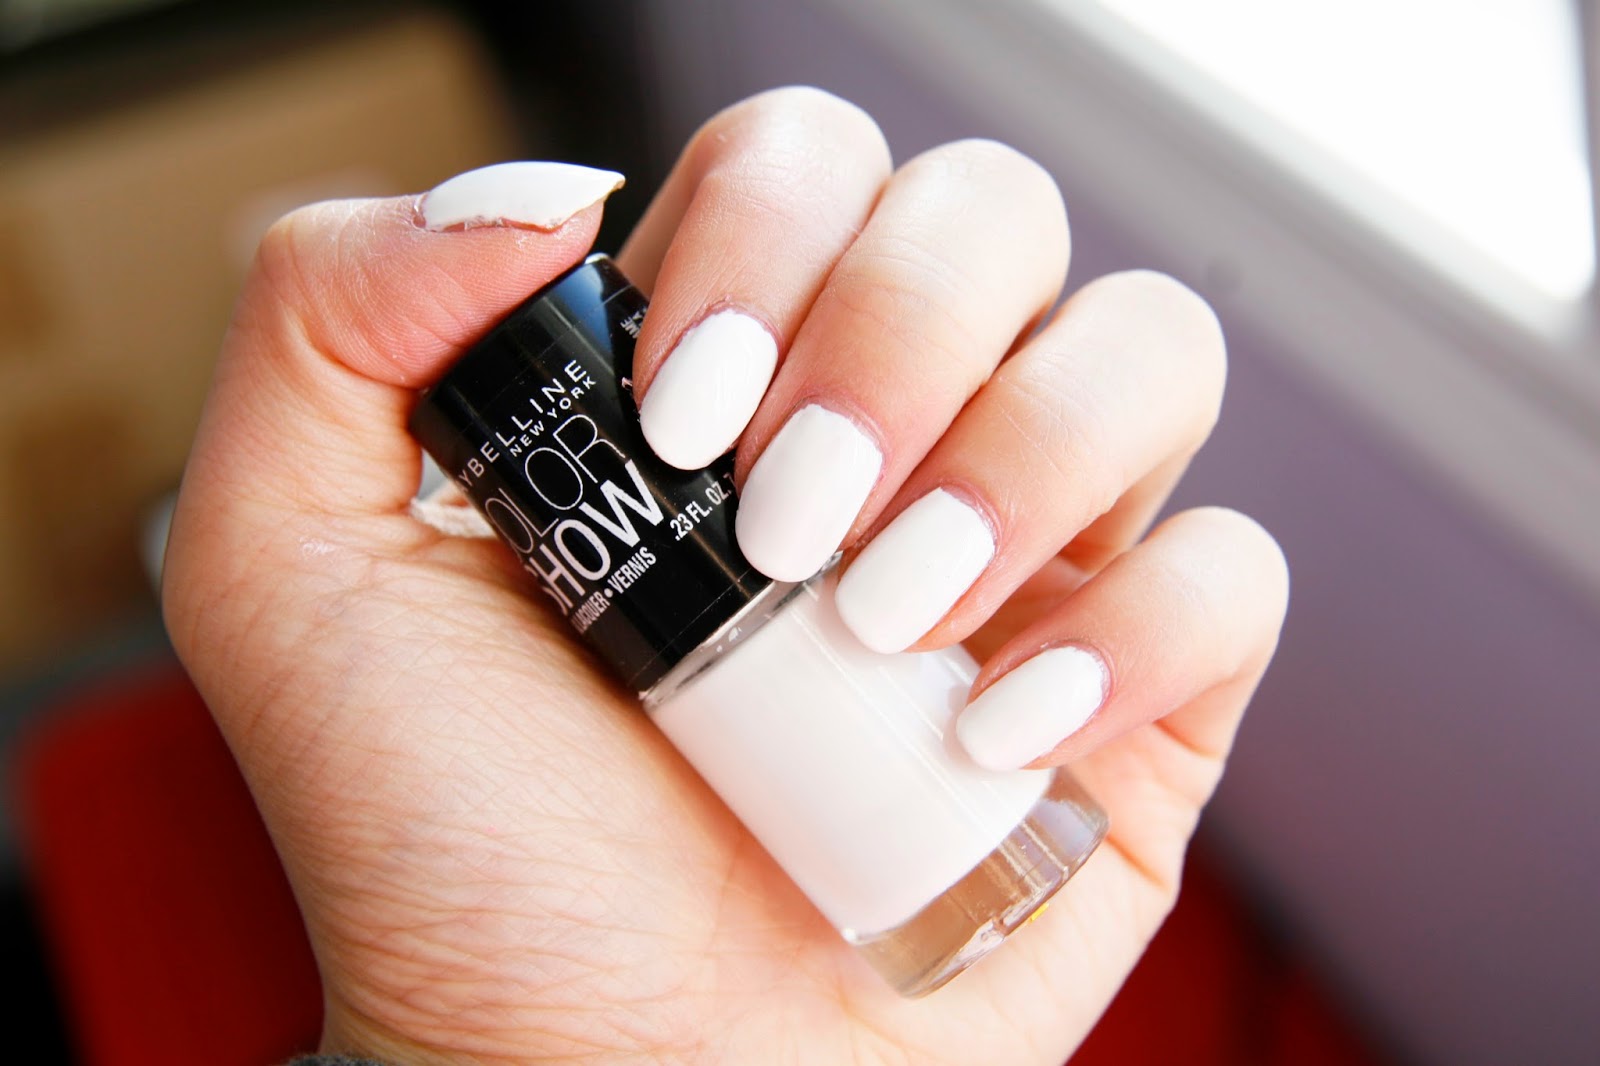 maybelline color show white nail polish